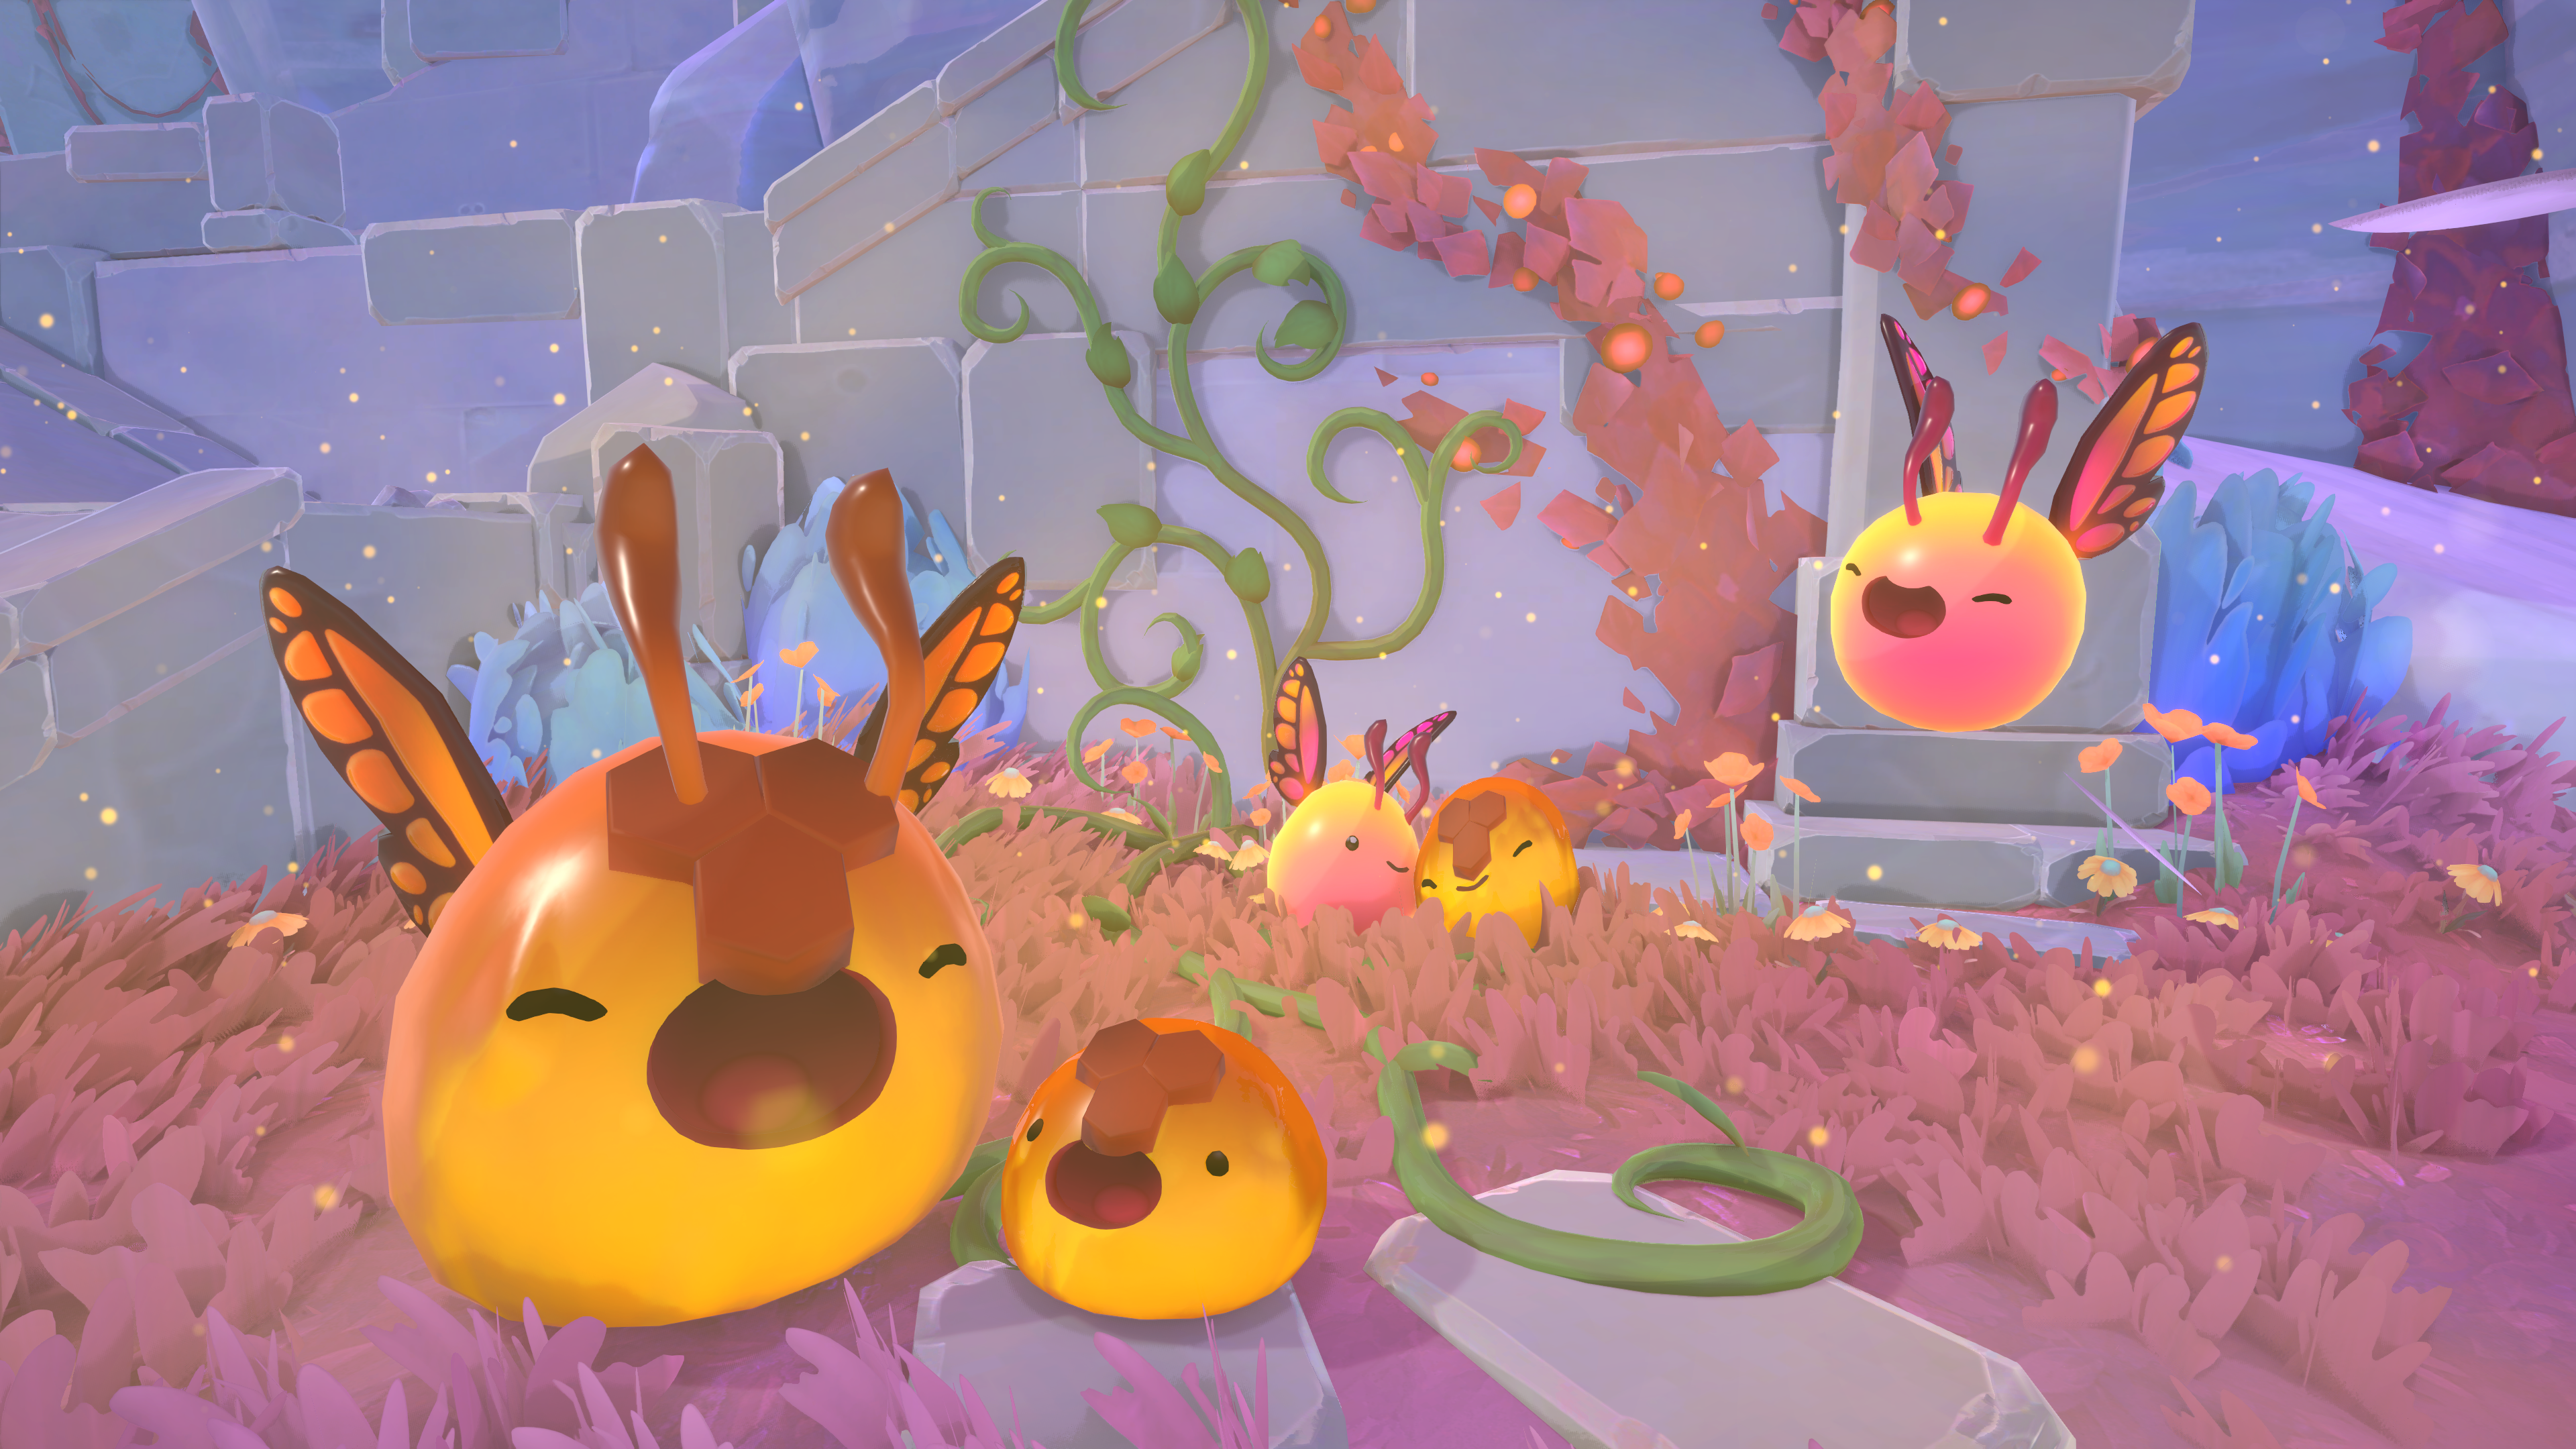 Next Slime Rancher 2 update adds new weather effects